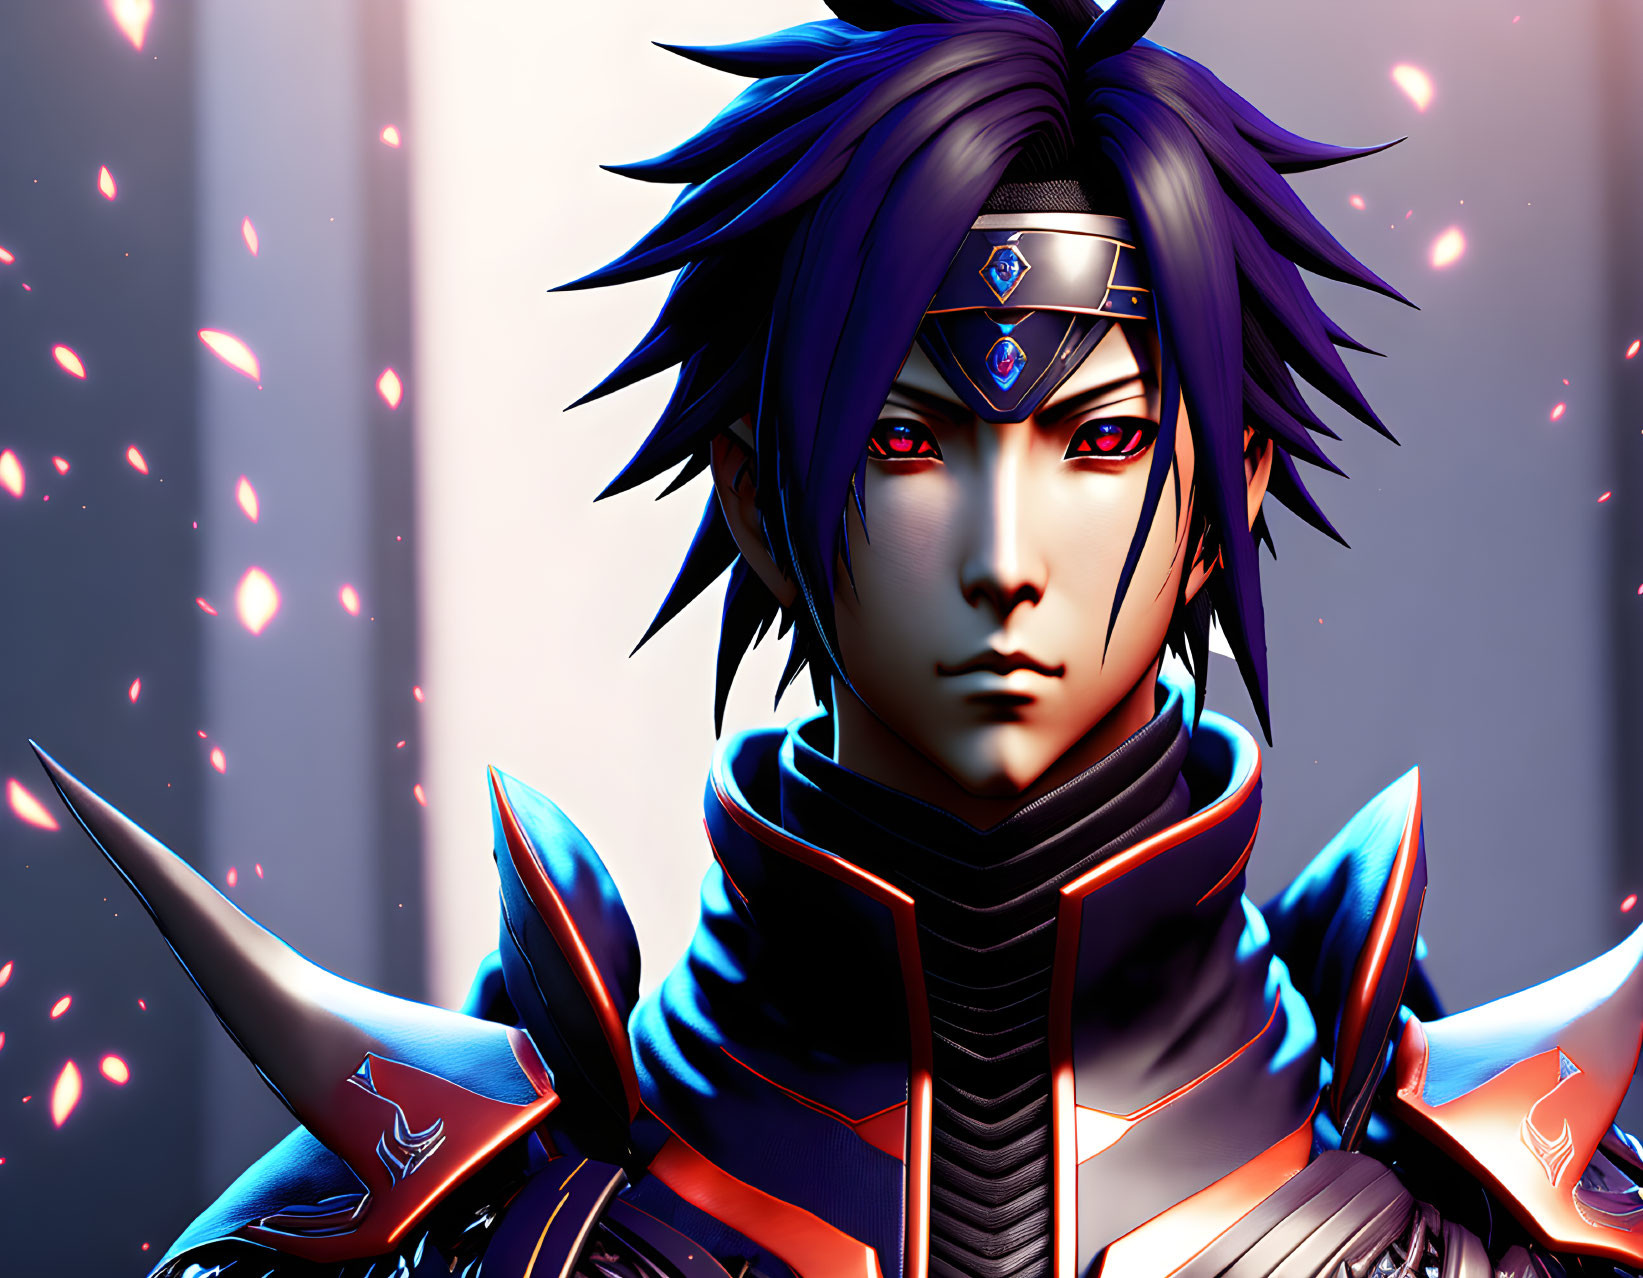 Stylized animated character with spiky dark hair and ornate armor